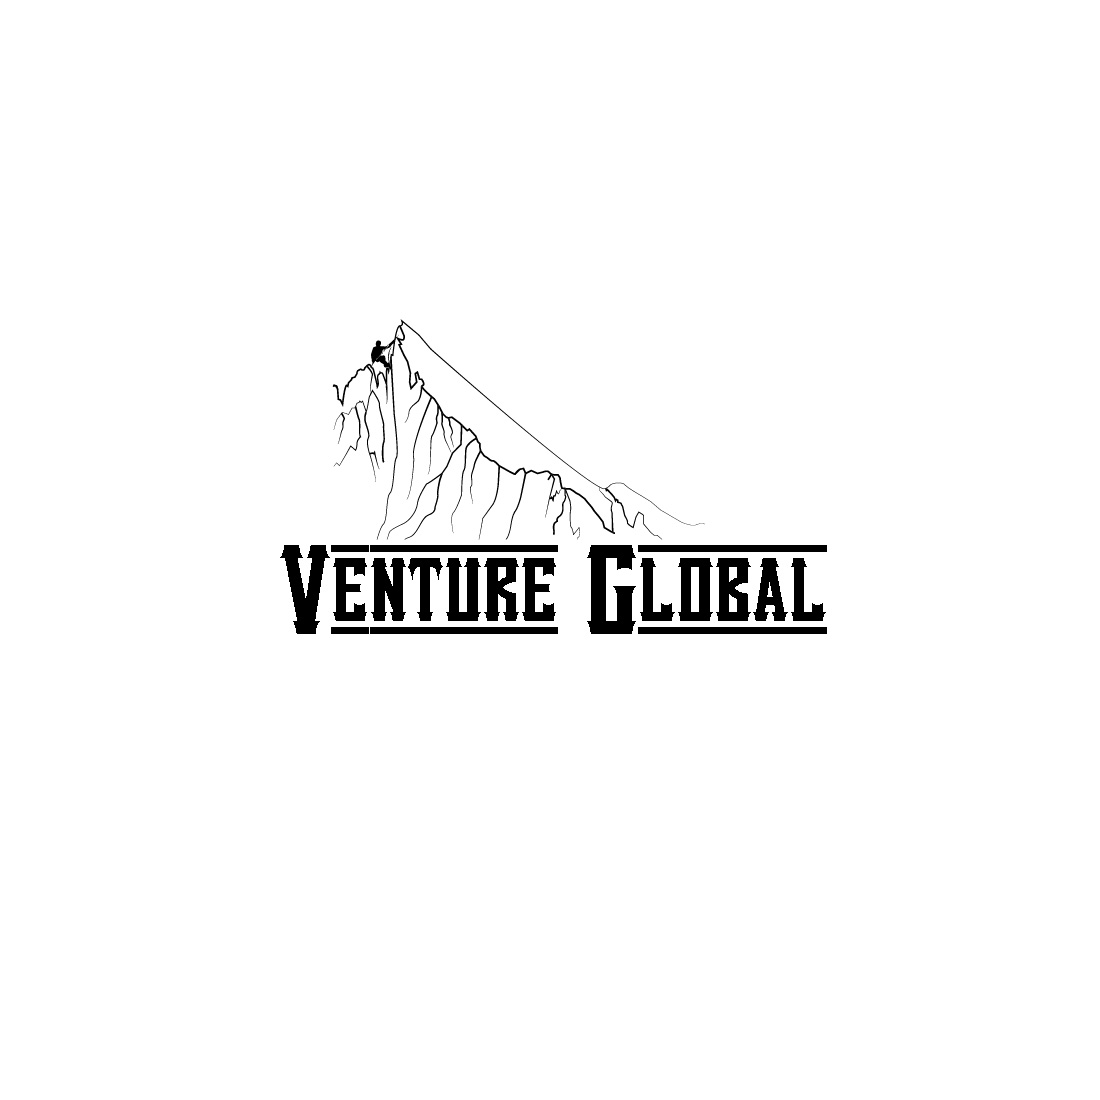 Venture Global cover image.